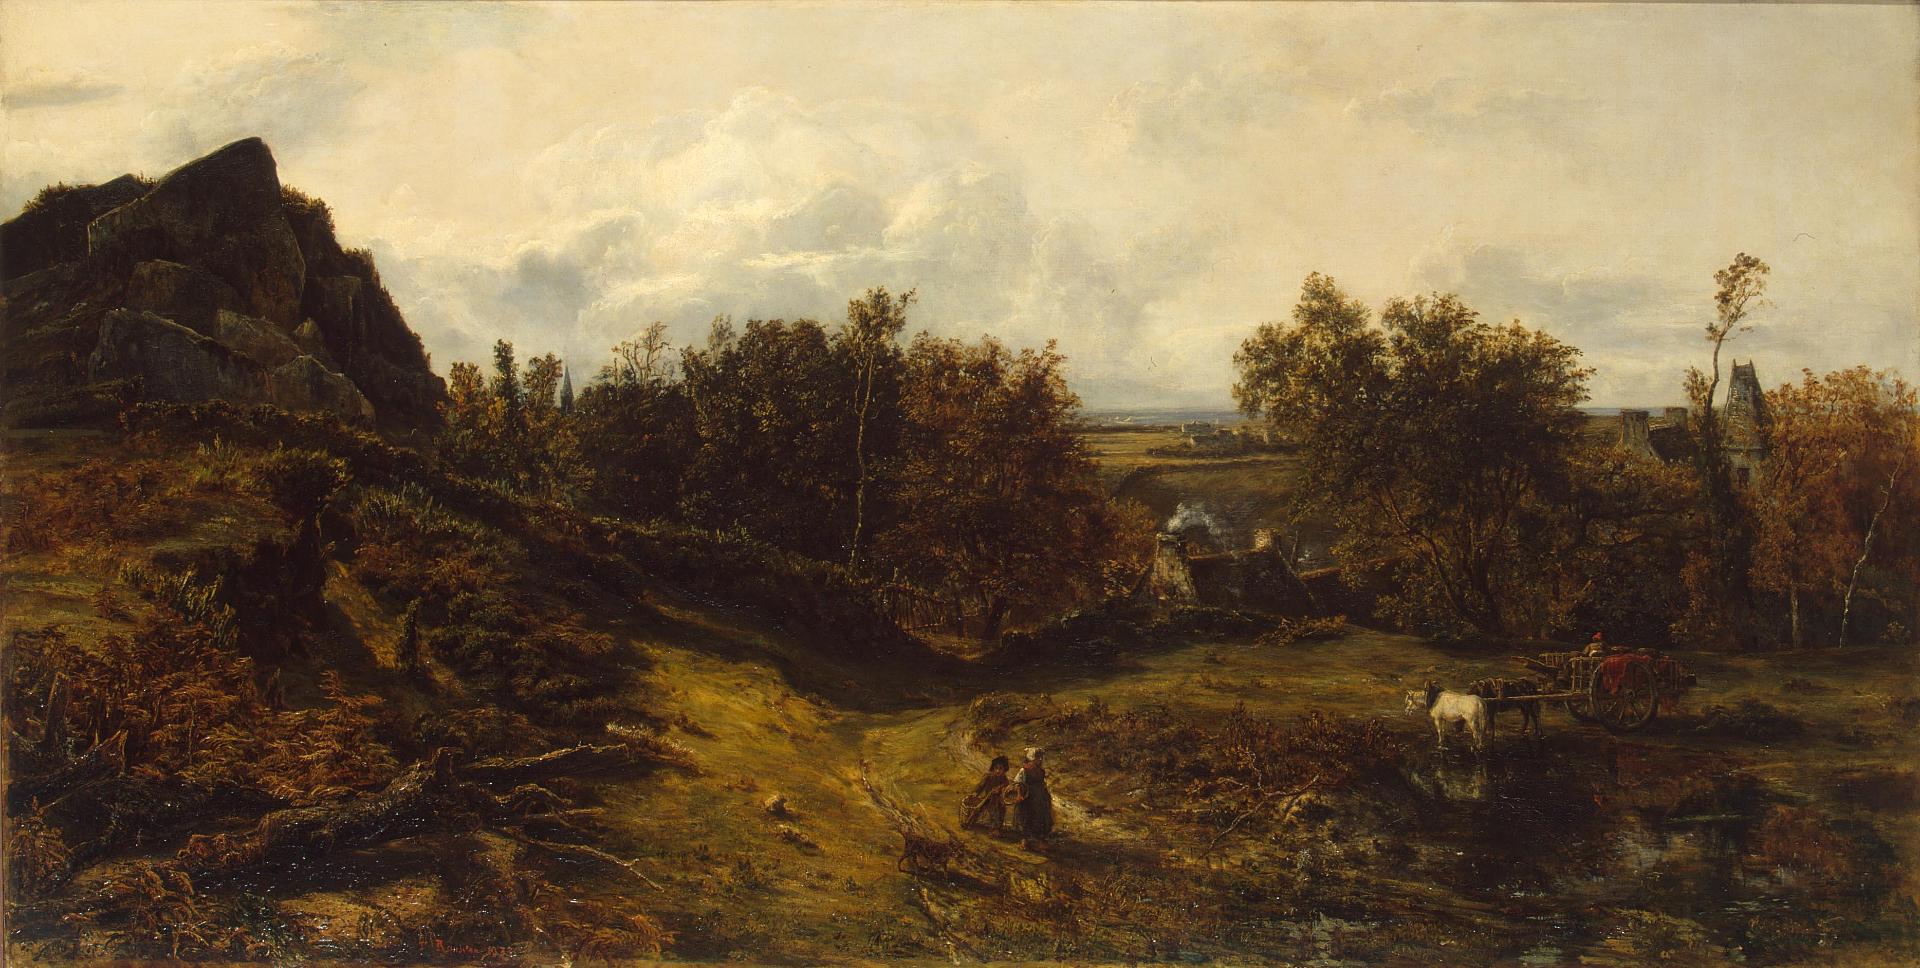 0505_Theodore Rousseau_View on the Outskirts of Granville 썸네일